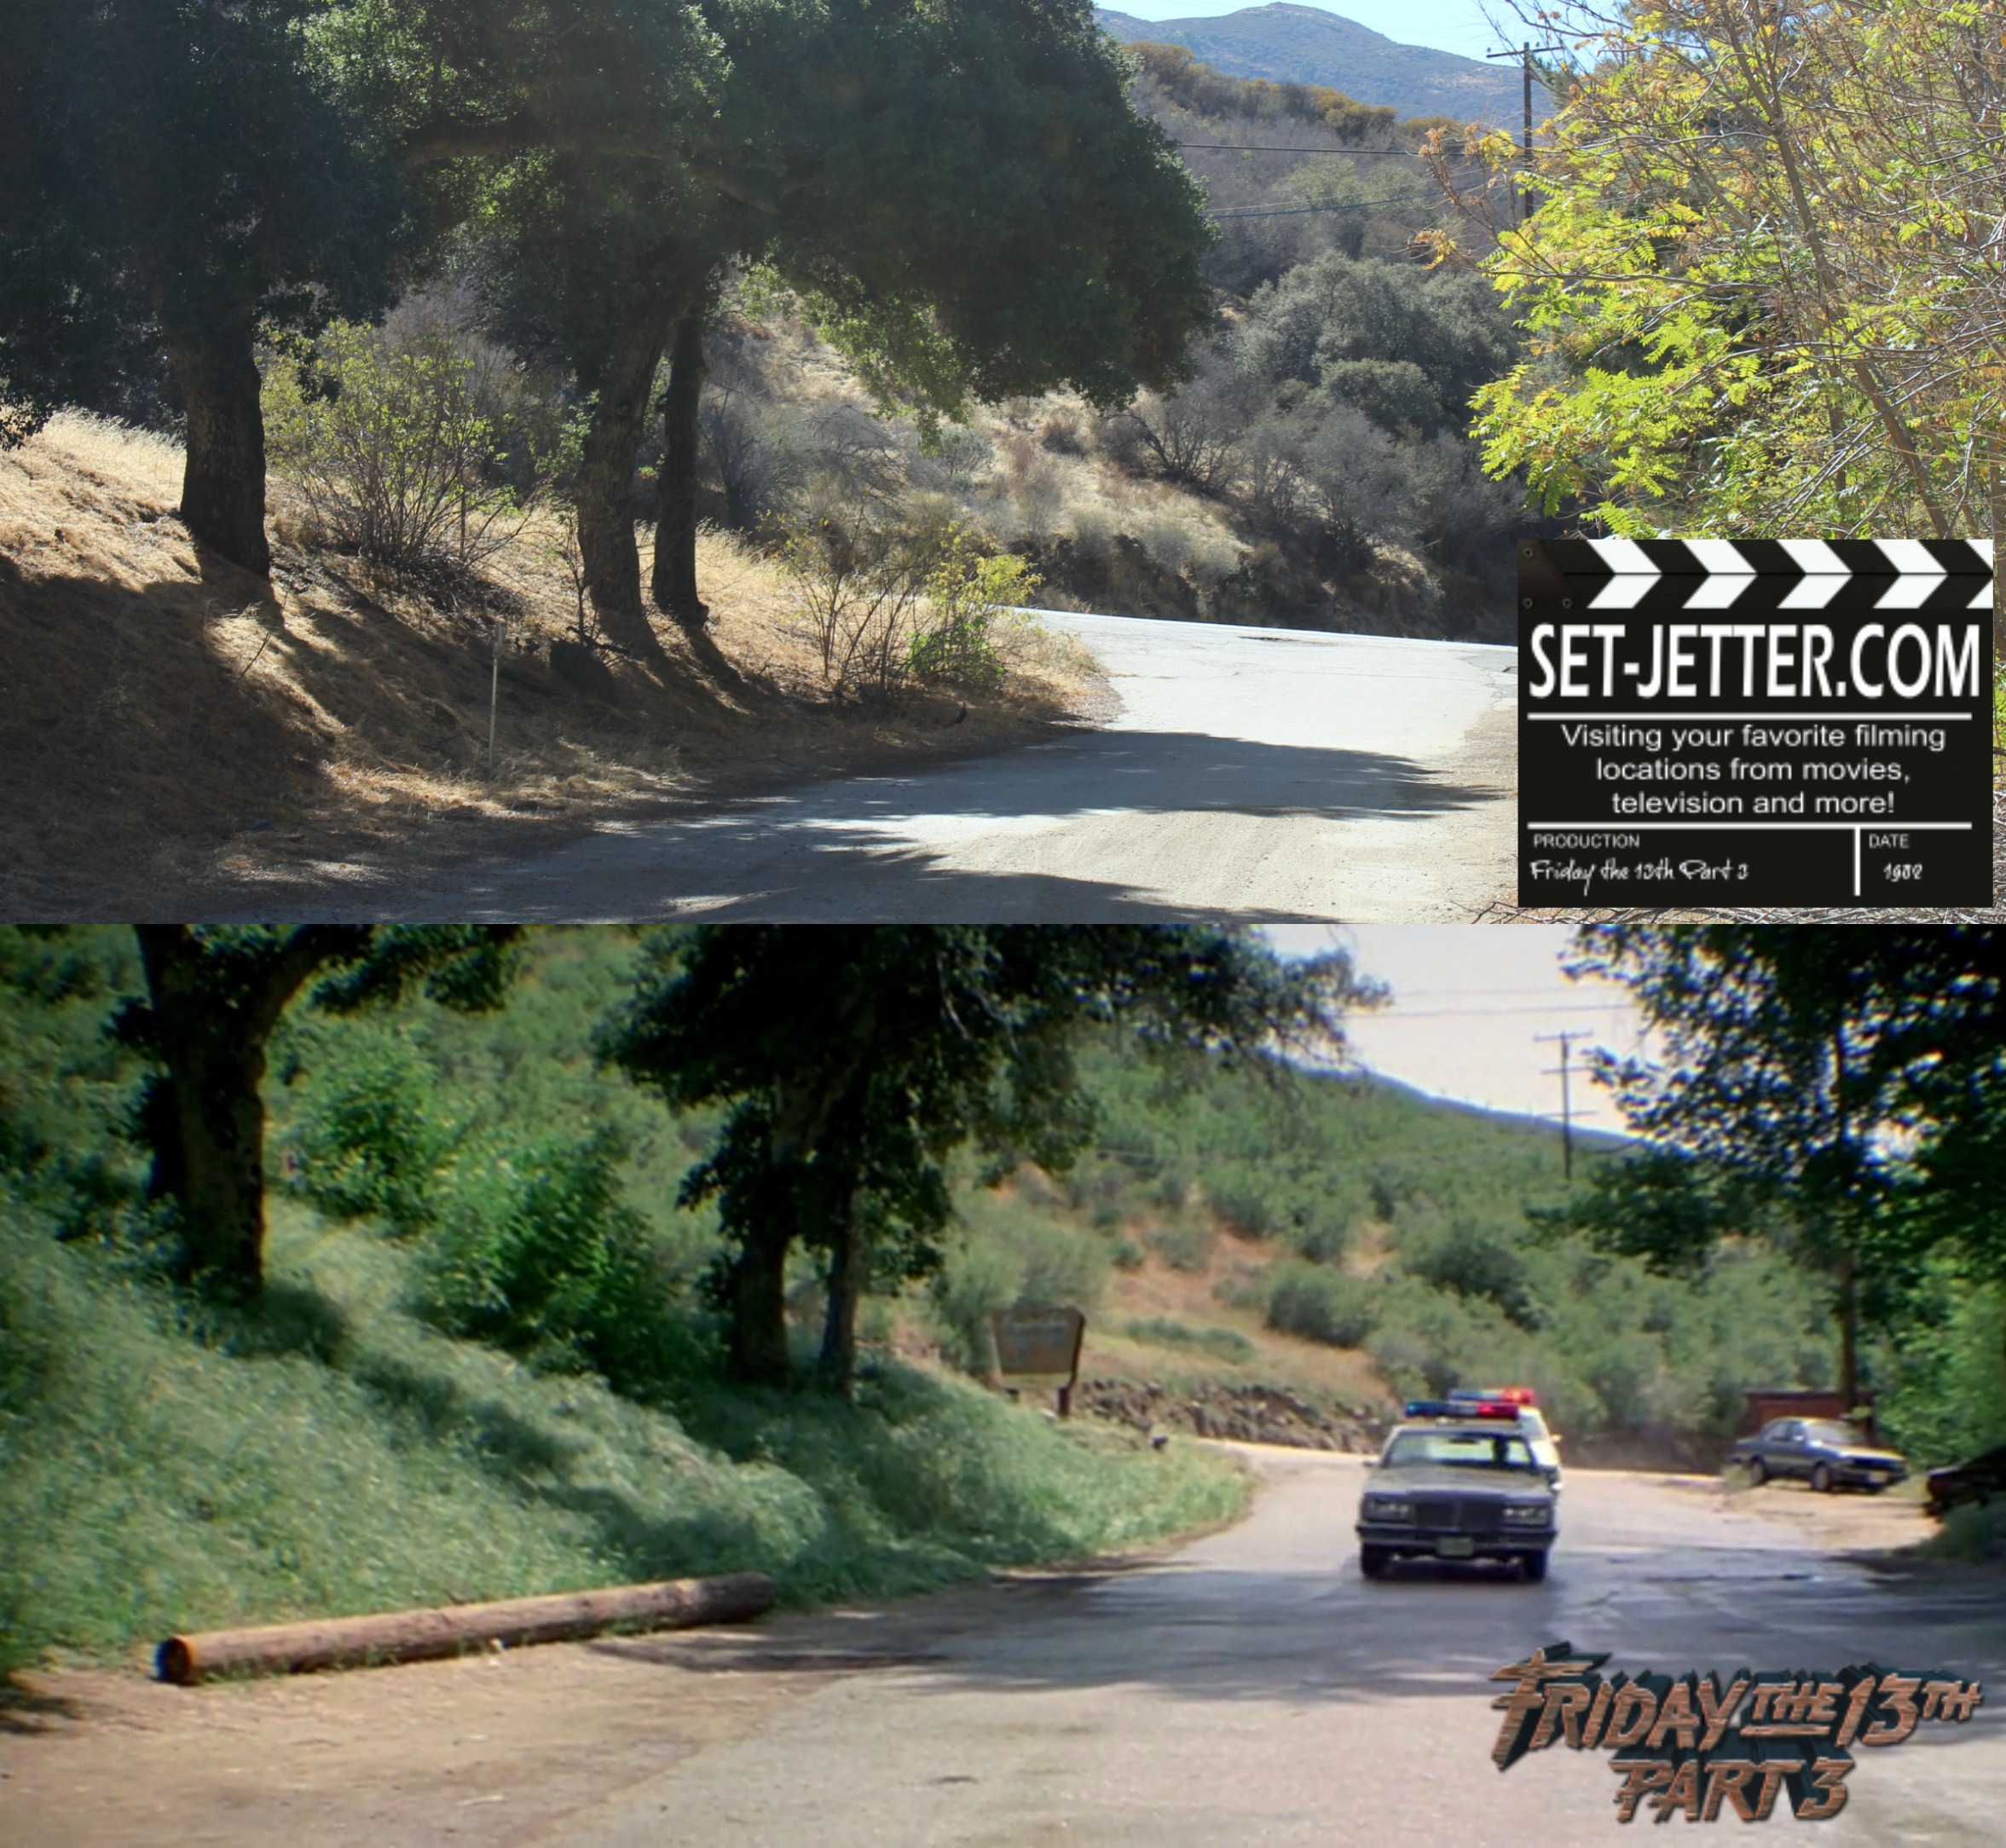 Friday the 13th Part 3 comparison 212.jpg